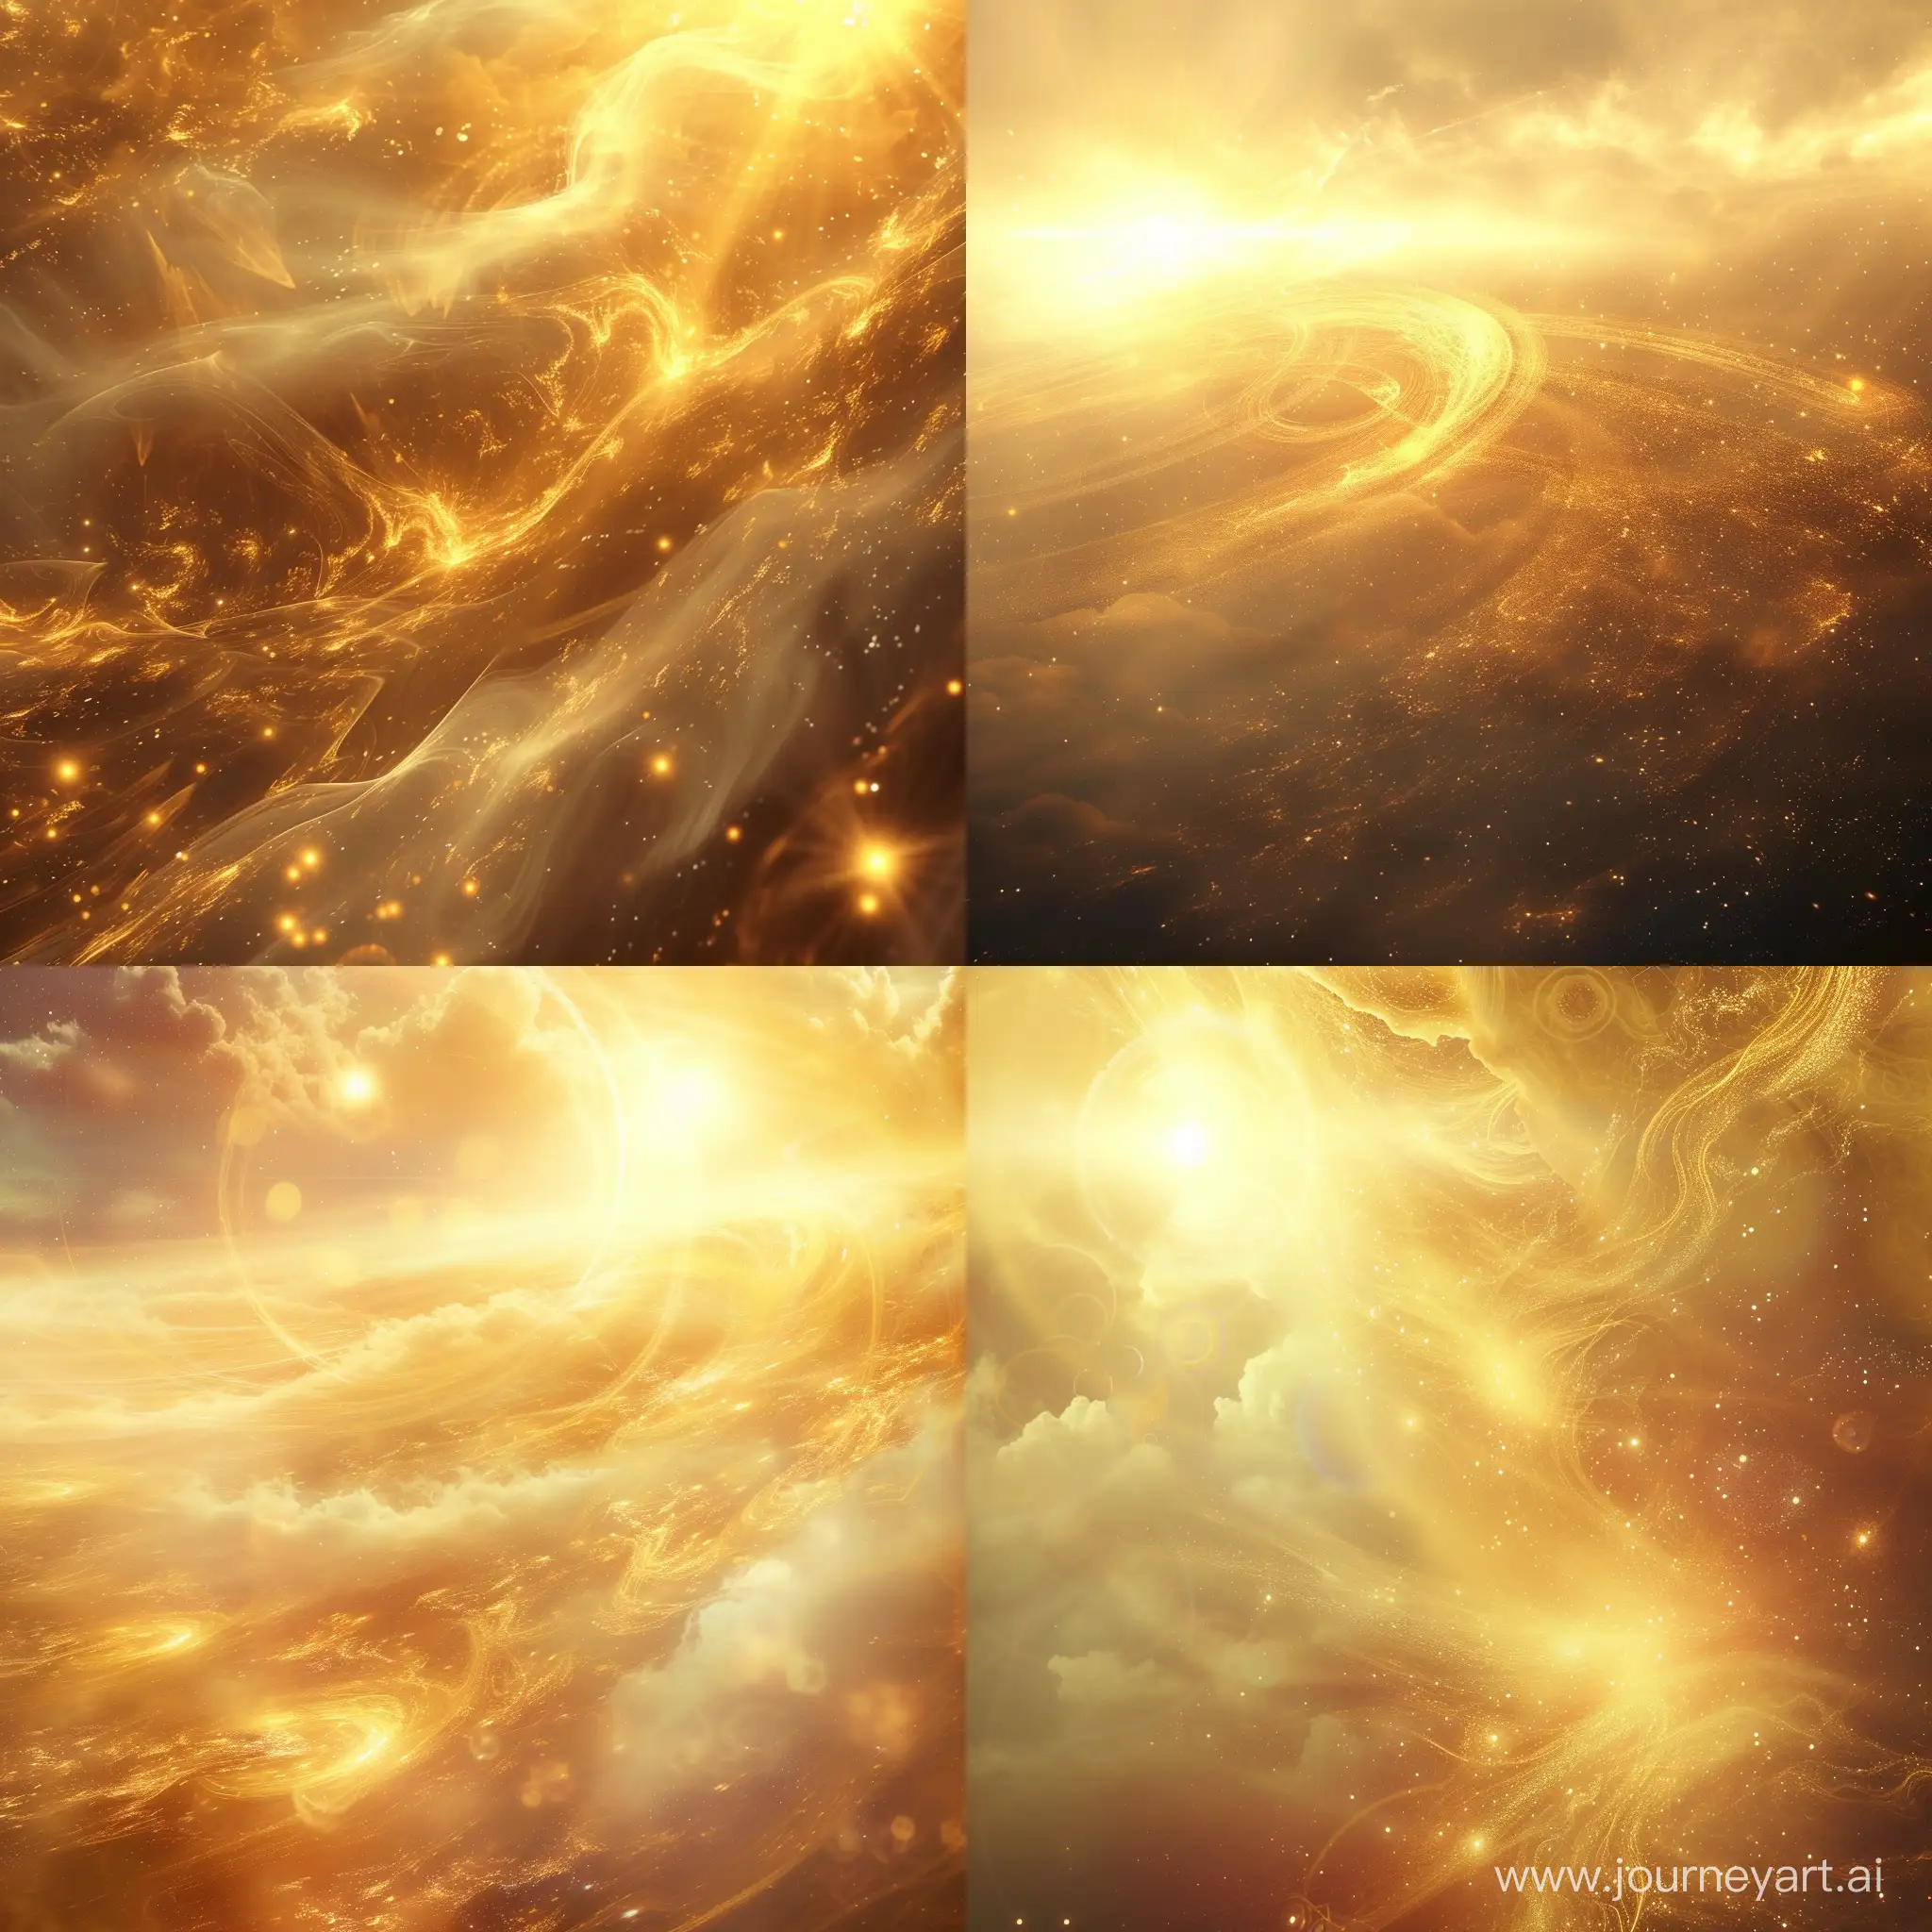 "Create a mesmerizing AI-generated image featuring a golden-hued celestial landscape. Envision a tranquil scene where ethereal spirits intertwine with divine energies, set against a cinematic backdrop that evokes both the grandeur of the cosmos and the serenity of a sacred realm. Incorporate subtle lens flares and soft lighting to enhance the spiritual ambiance."